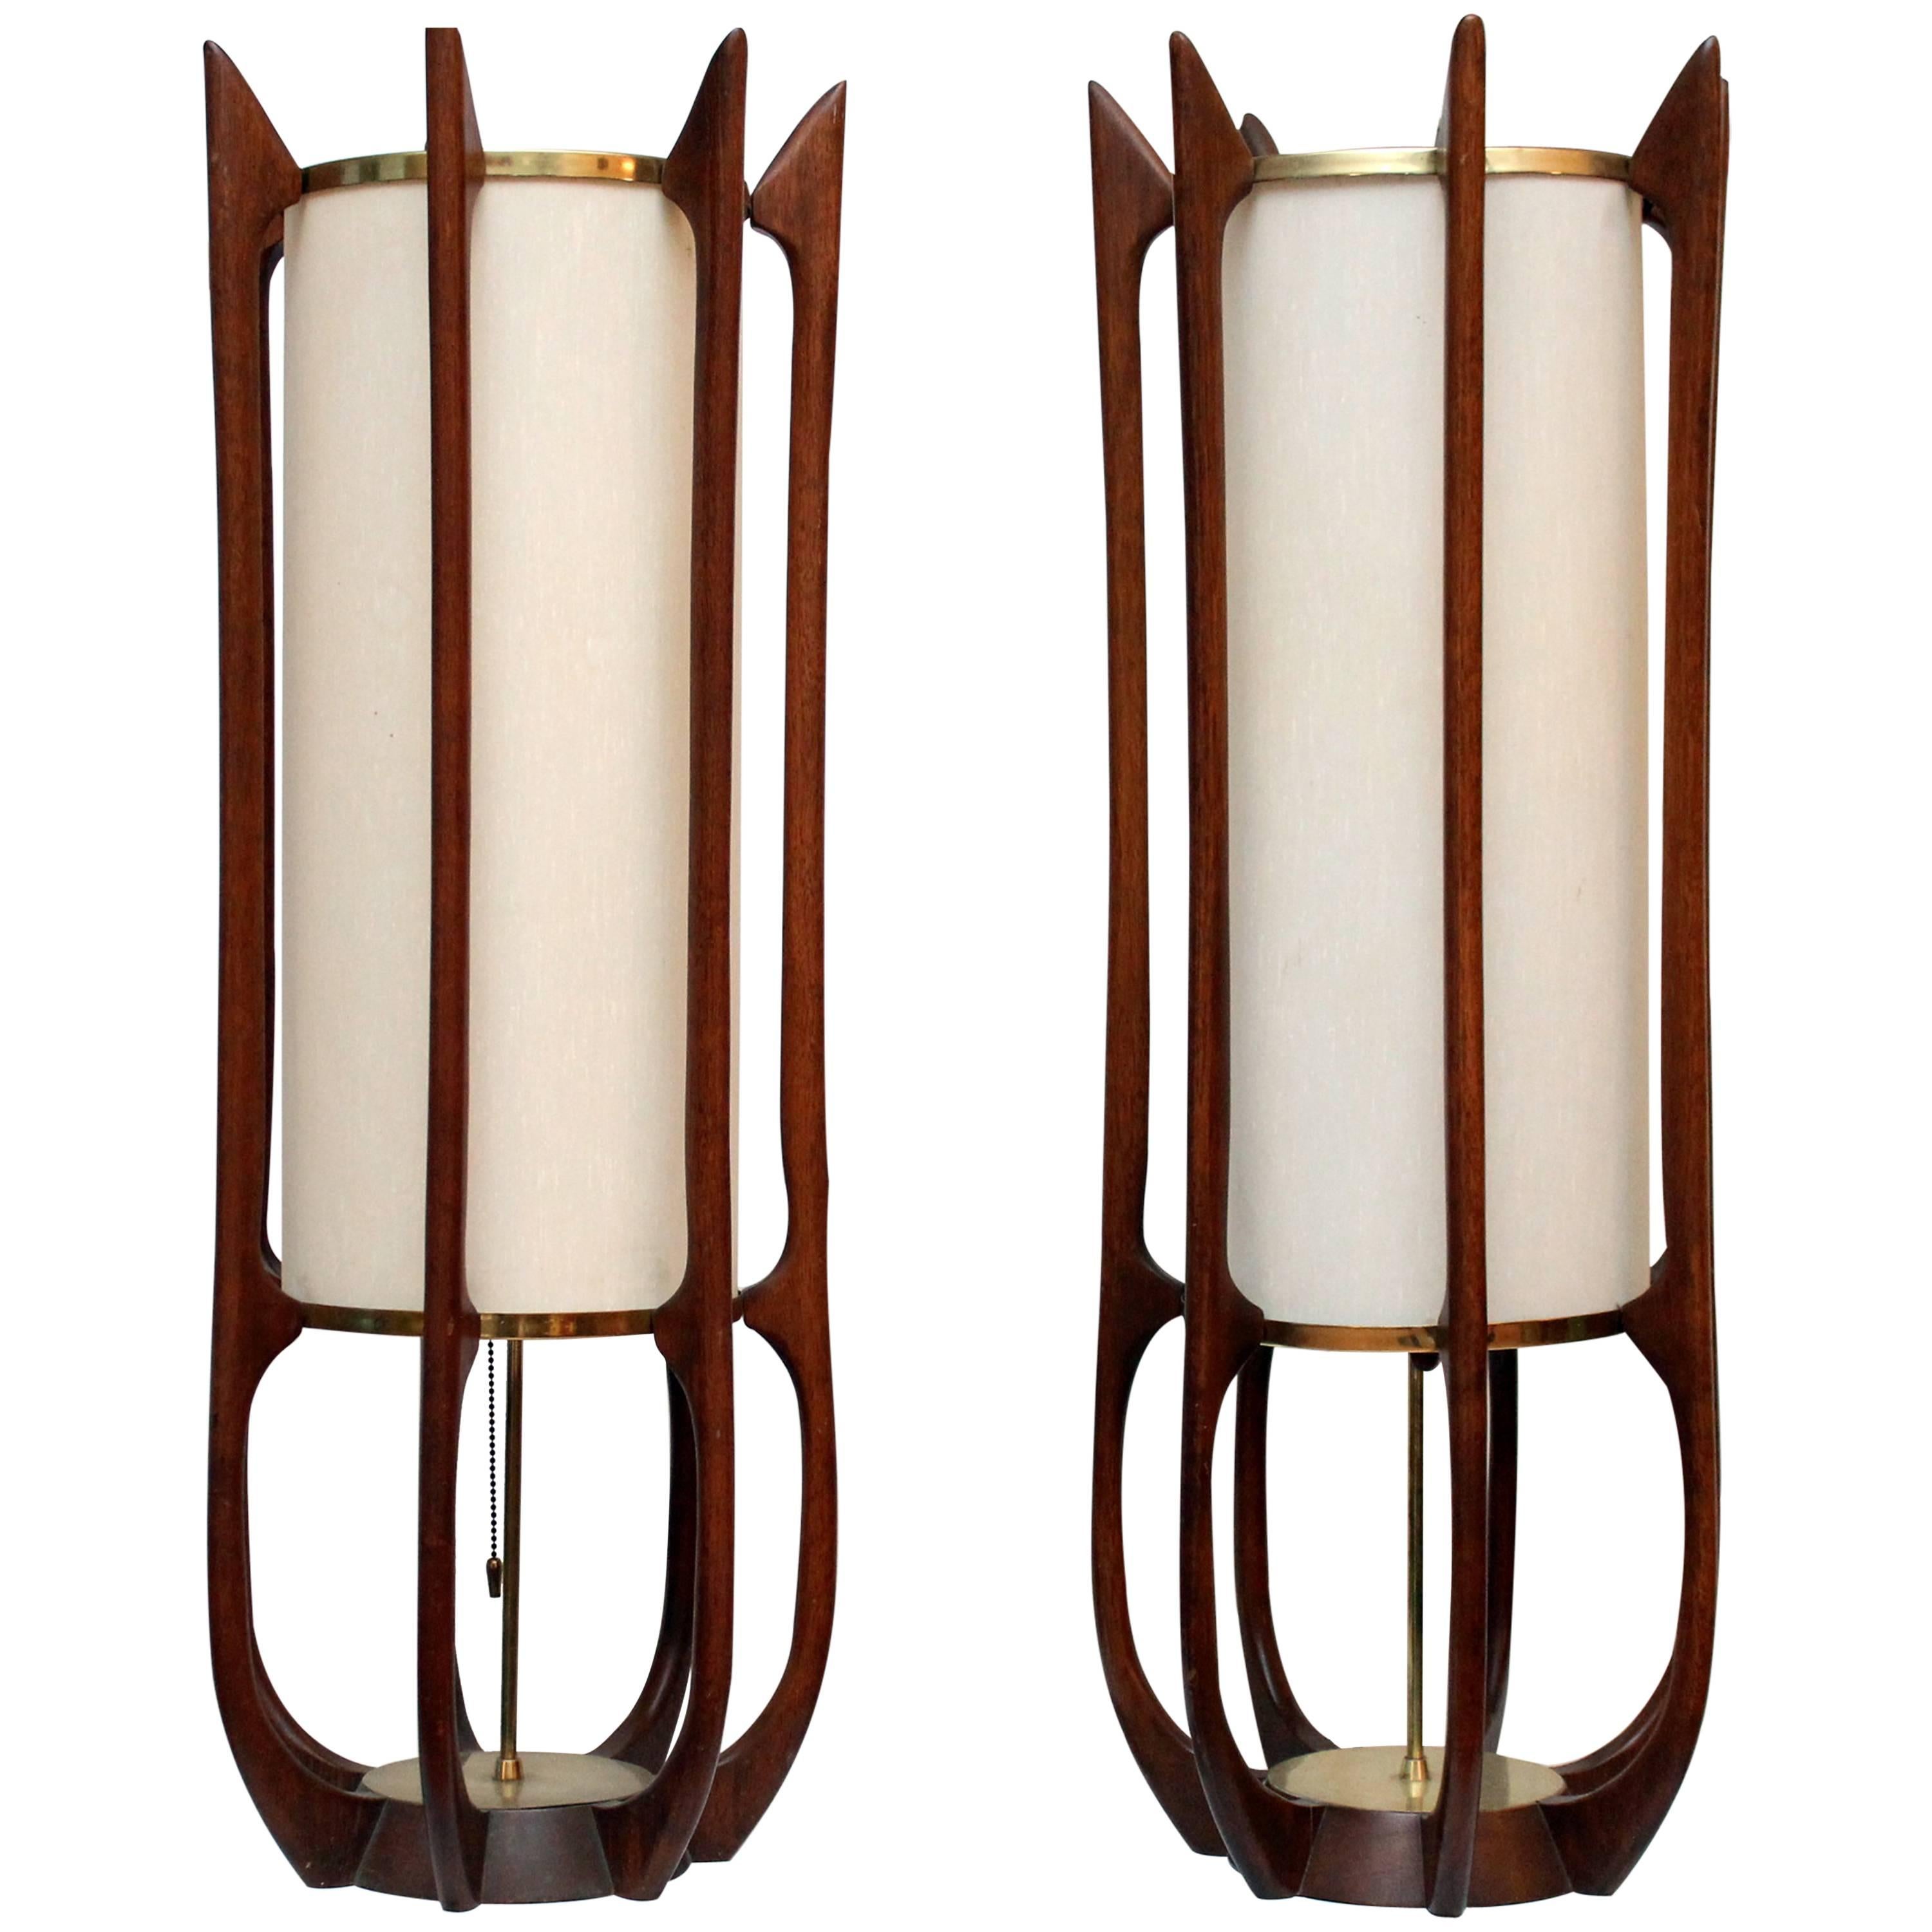 Pair of Tall Sculptural Midcentury Table Lamps by Modeline